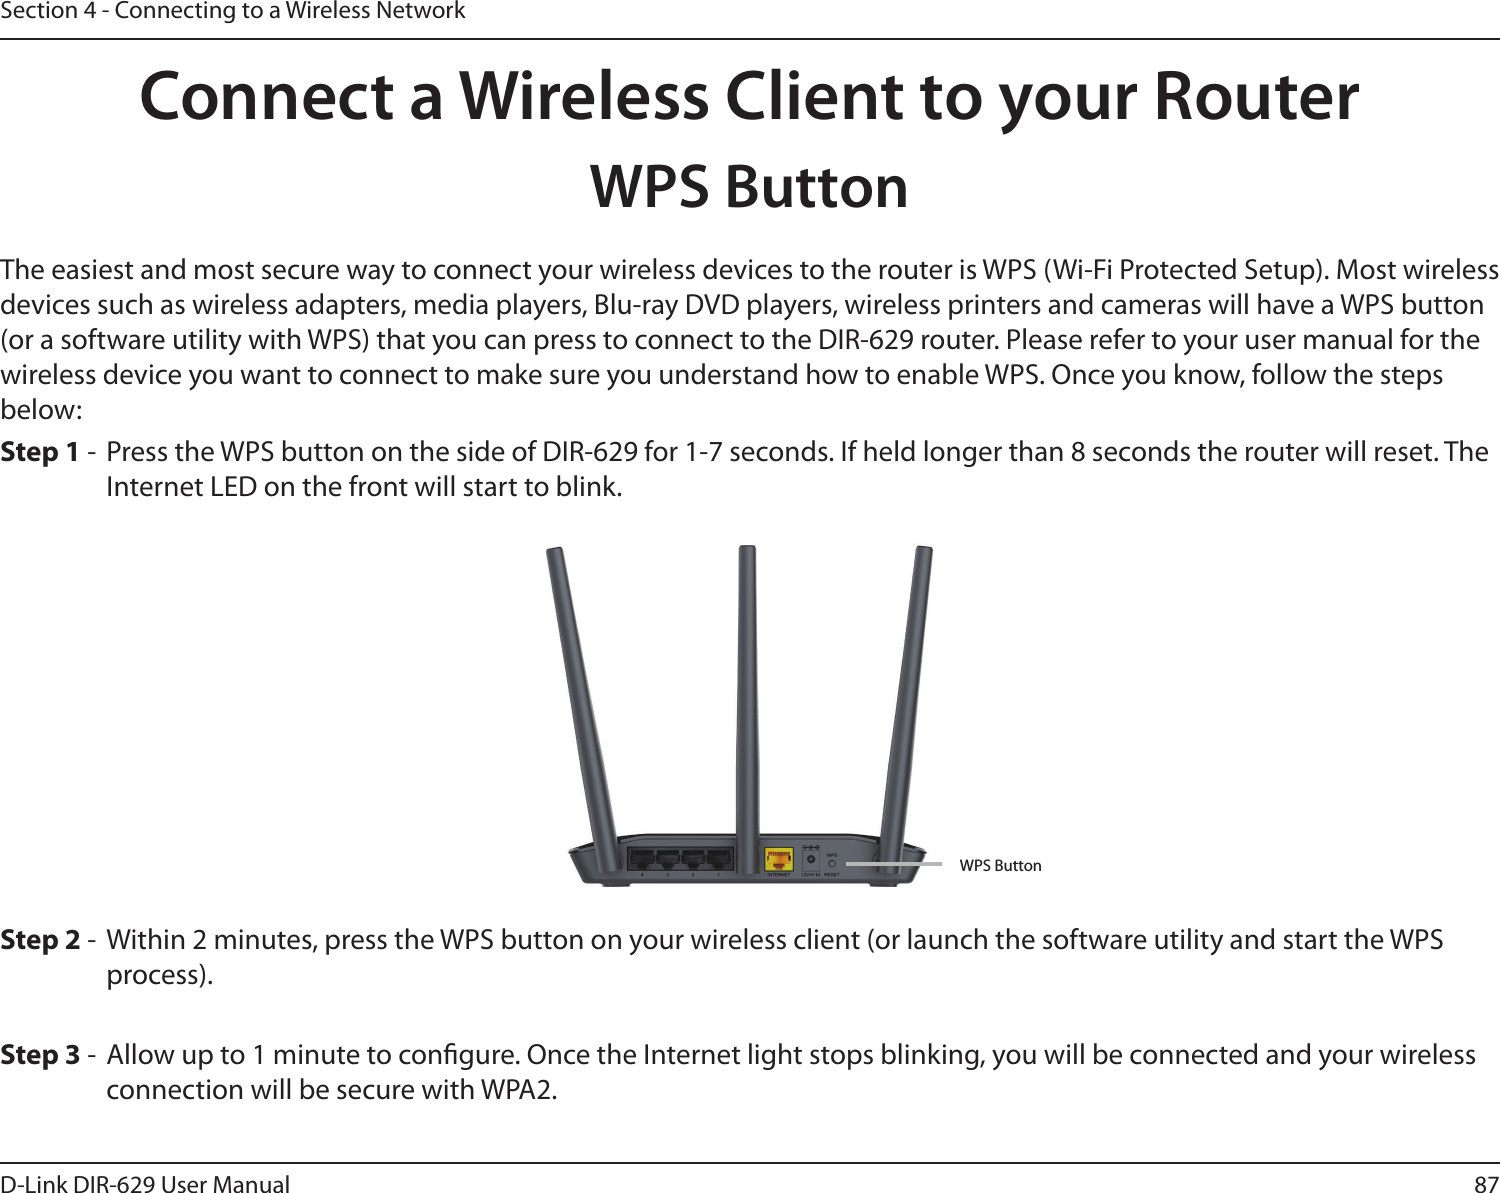 87D-Link DIR-629 User ManualSection 4 - Connecting to a Wireless NetworkConnect a Wireless Client to your RouterWPS Button - Within 2 minutes, press the WPS button on your wireless client (or launch the software utility and start the WPS process).The easiest and most secure way to connect your wireless devices to the router is WPS (Wi-Fi Protected Setup). Most wireless wireless device you want to connect to make sure you understand how to enable WPS. Once you know, follow the steps below:Step 1 Internet LED on the front will start to blink.Step 3 -  Allow up to 1 minute to congure. Once the Internet light stops blinking, you will be connected and your wireless connection will be secure with WPA2.